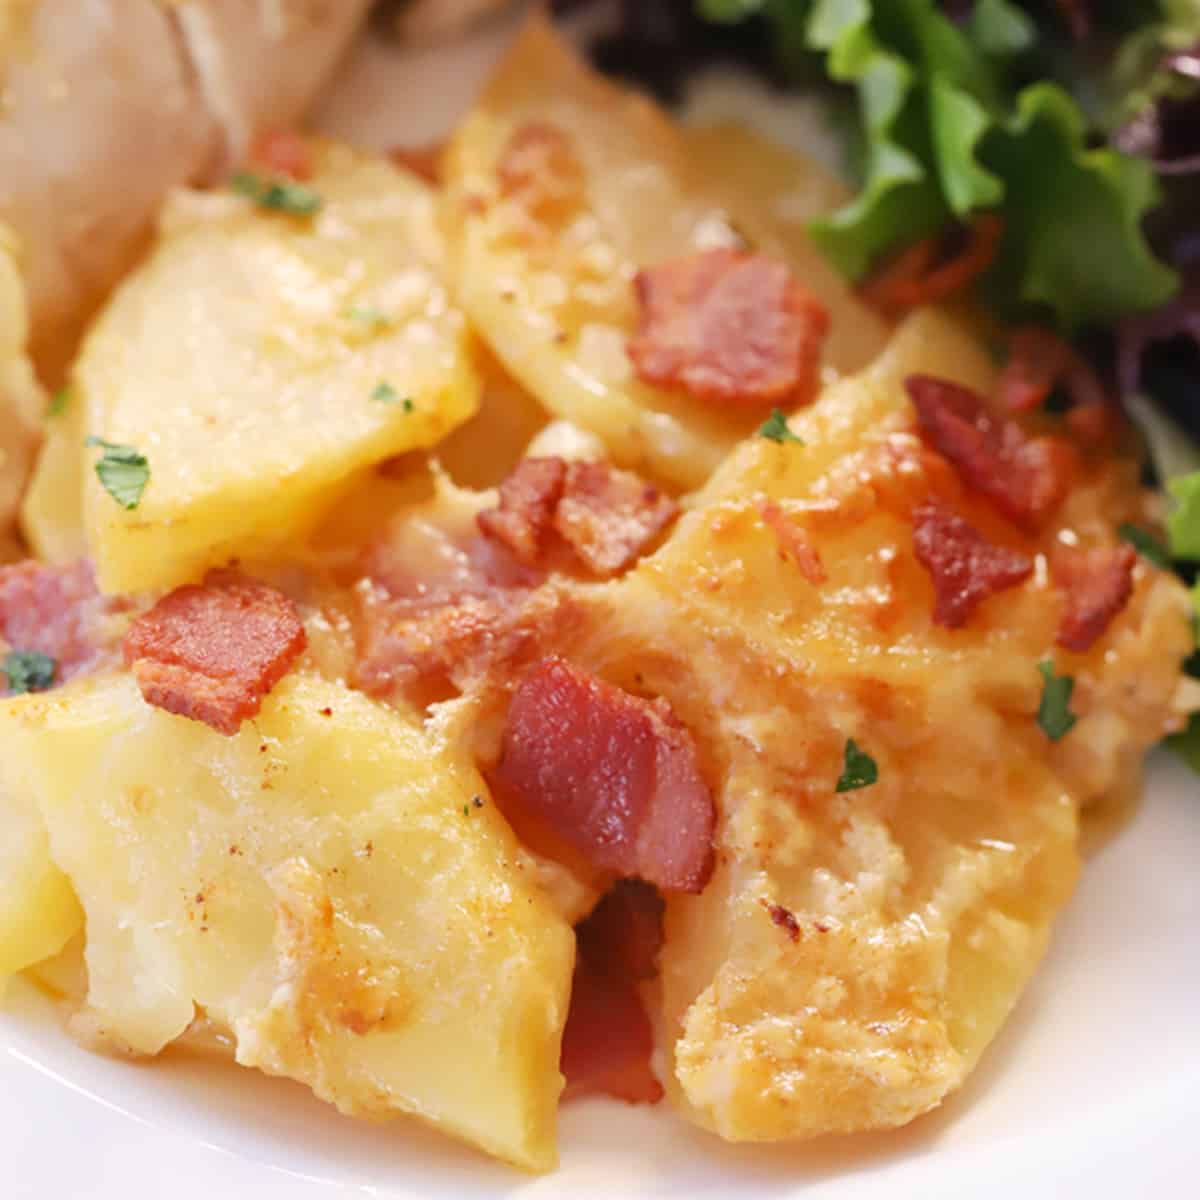 scalloped potatoes with bacon recipe, potatoes with bacon and cheese.